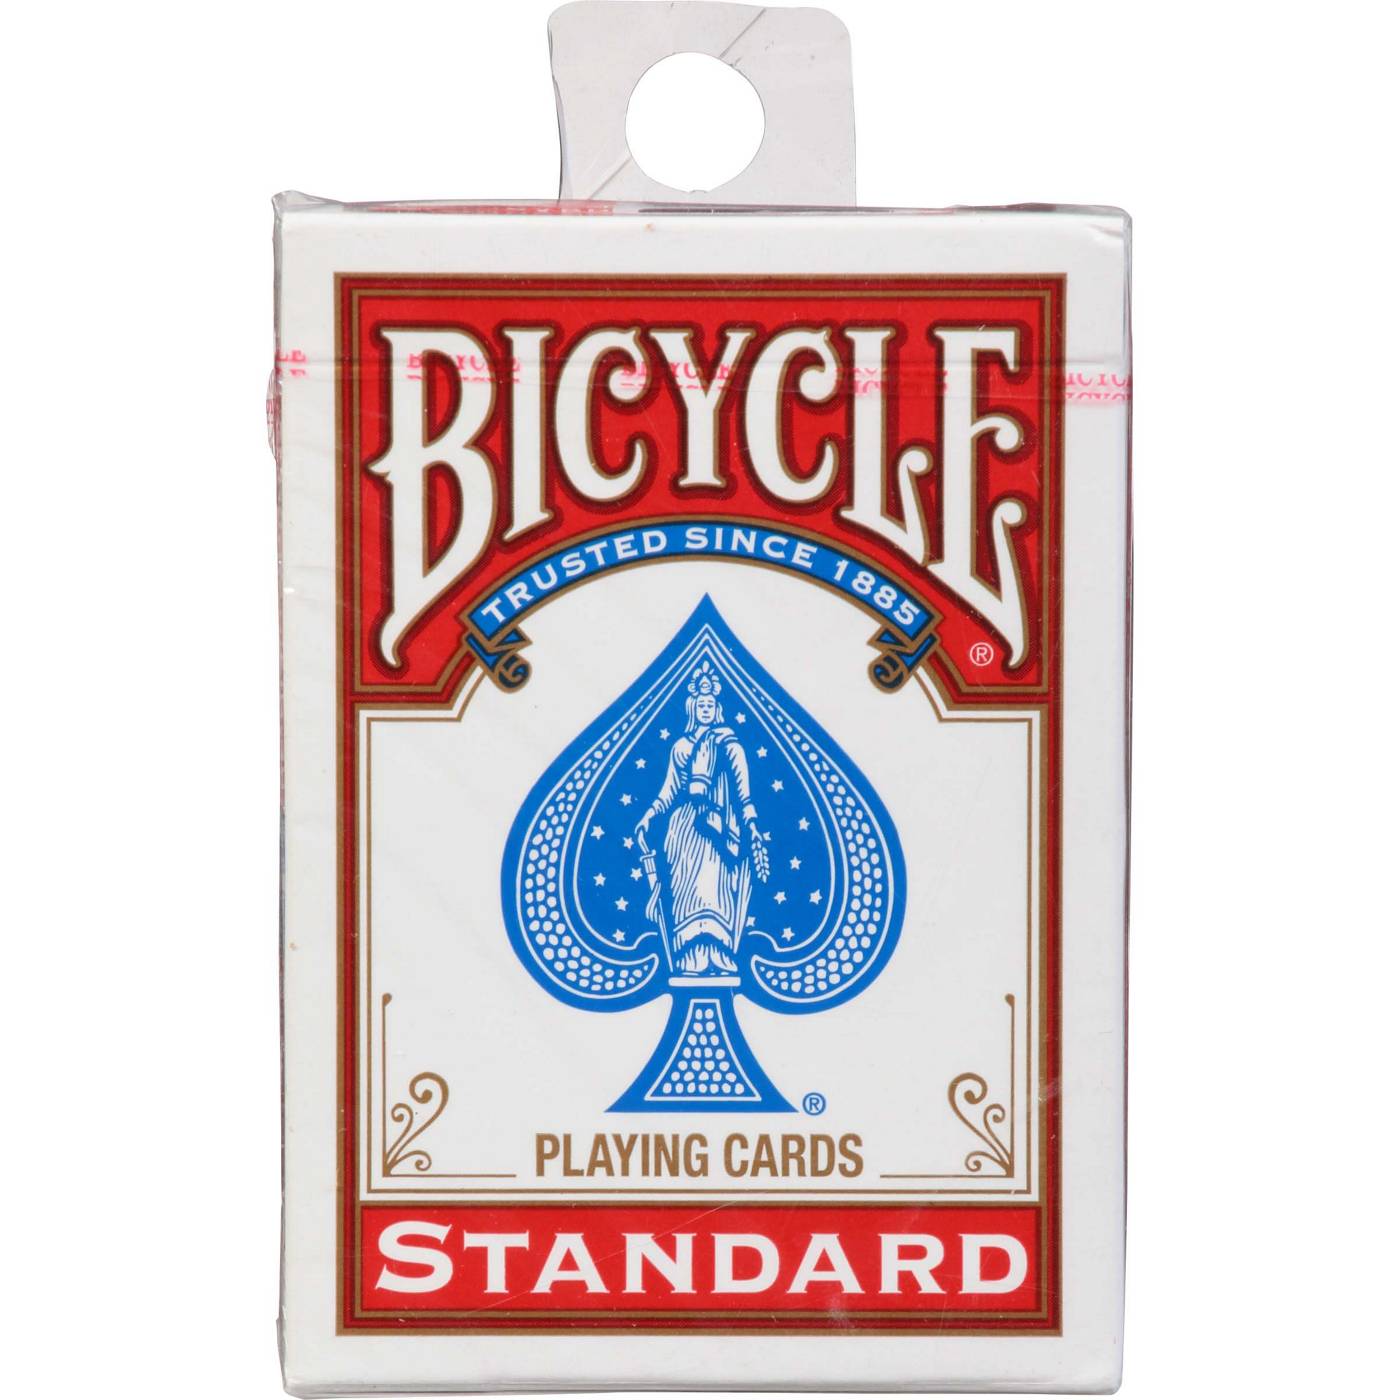 Bicycle Standard Playing Cards; image 1 of 2